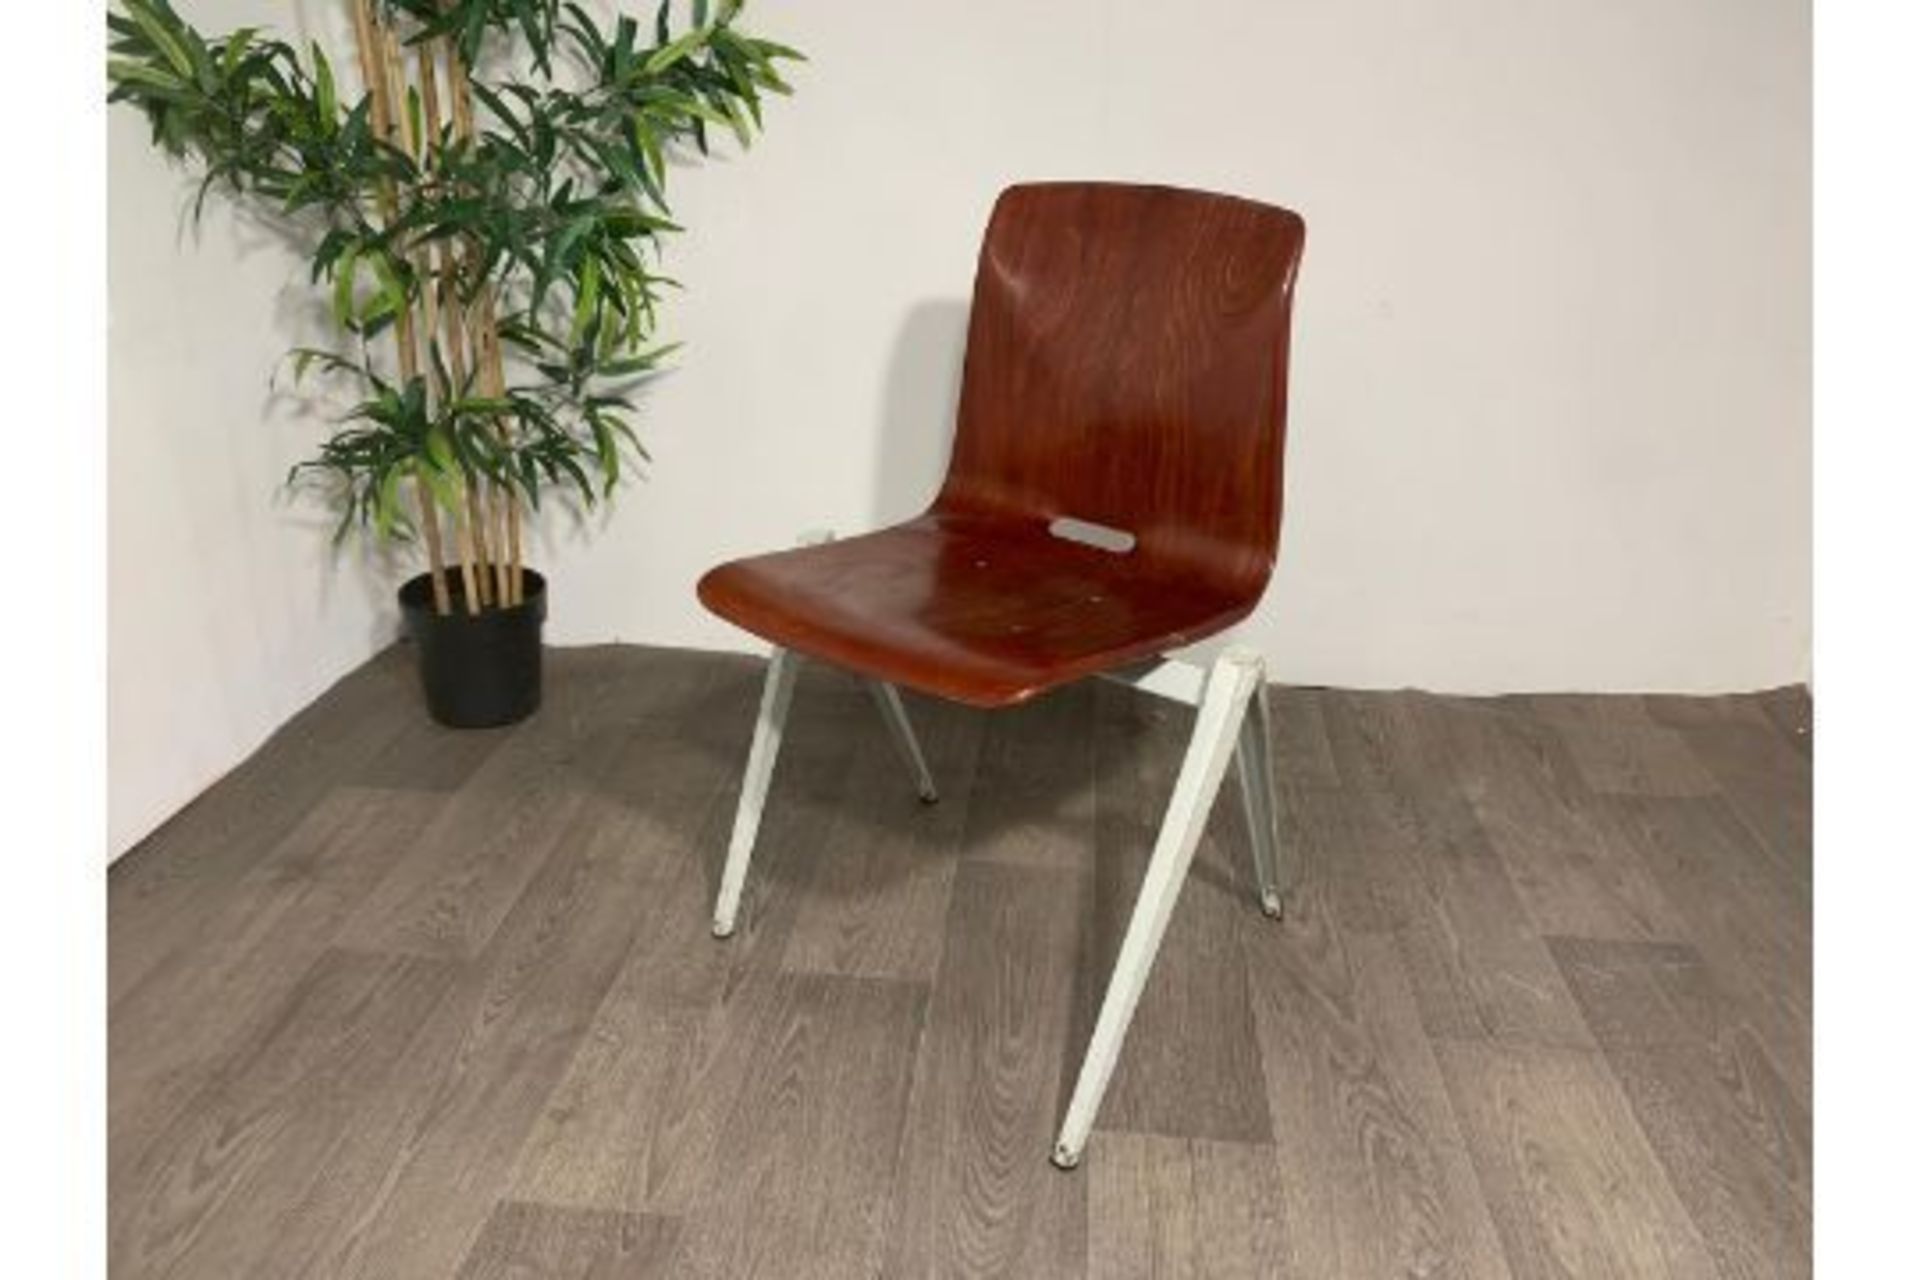 Thur Op Seat Stack-able Chair in mahogany resin x2 - Image 2 of 3